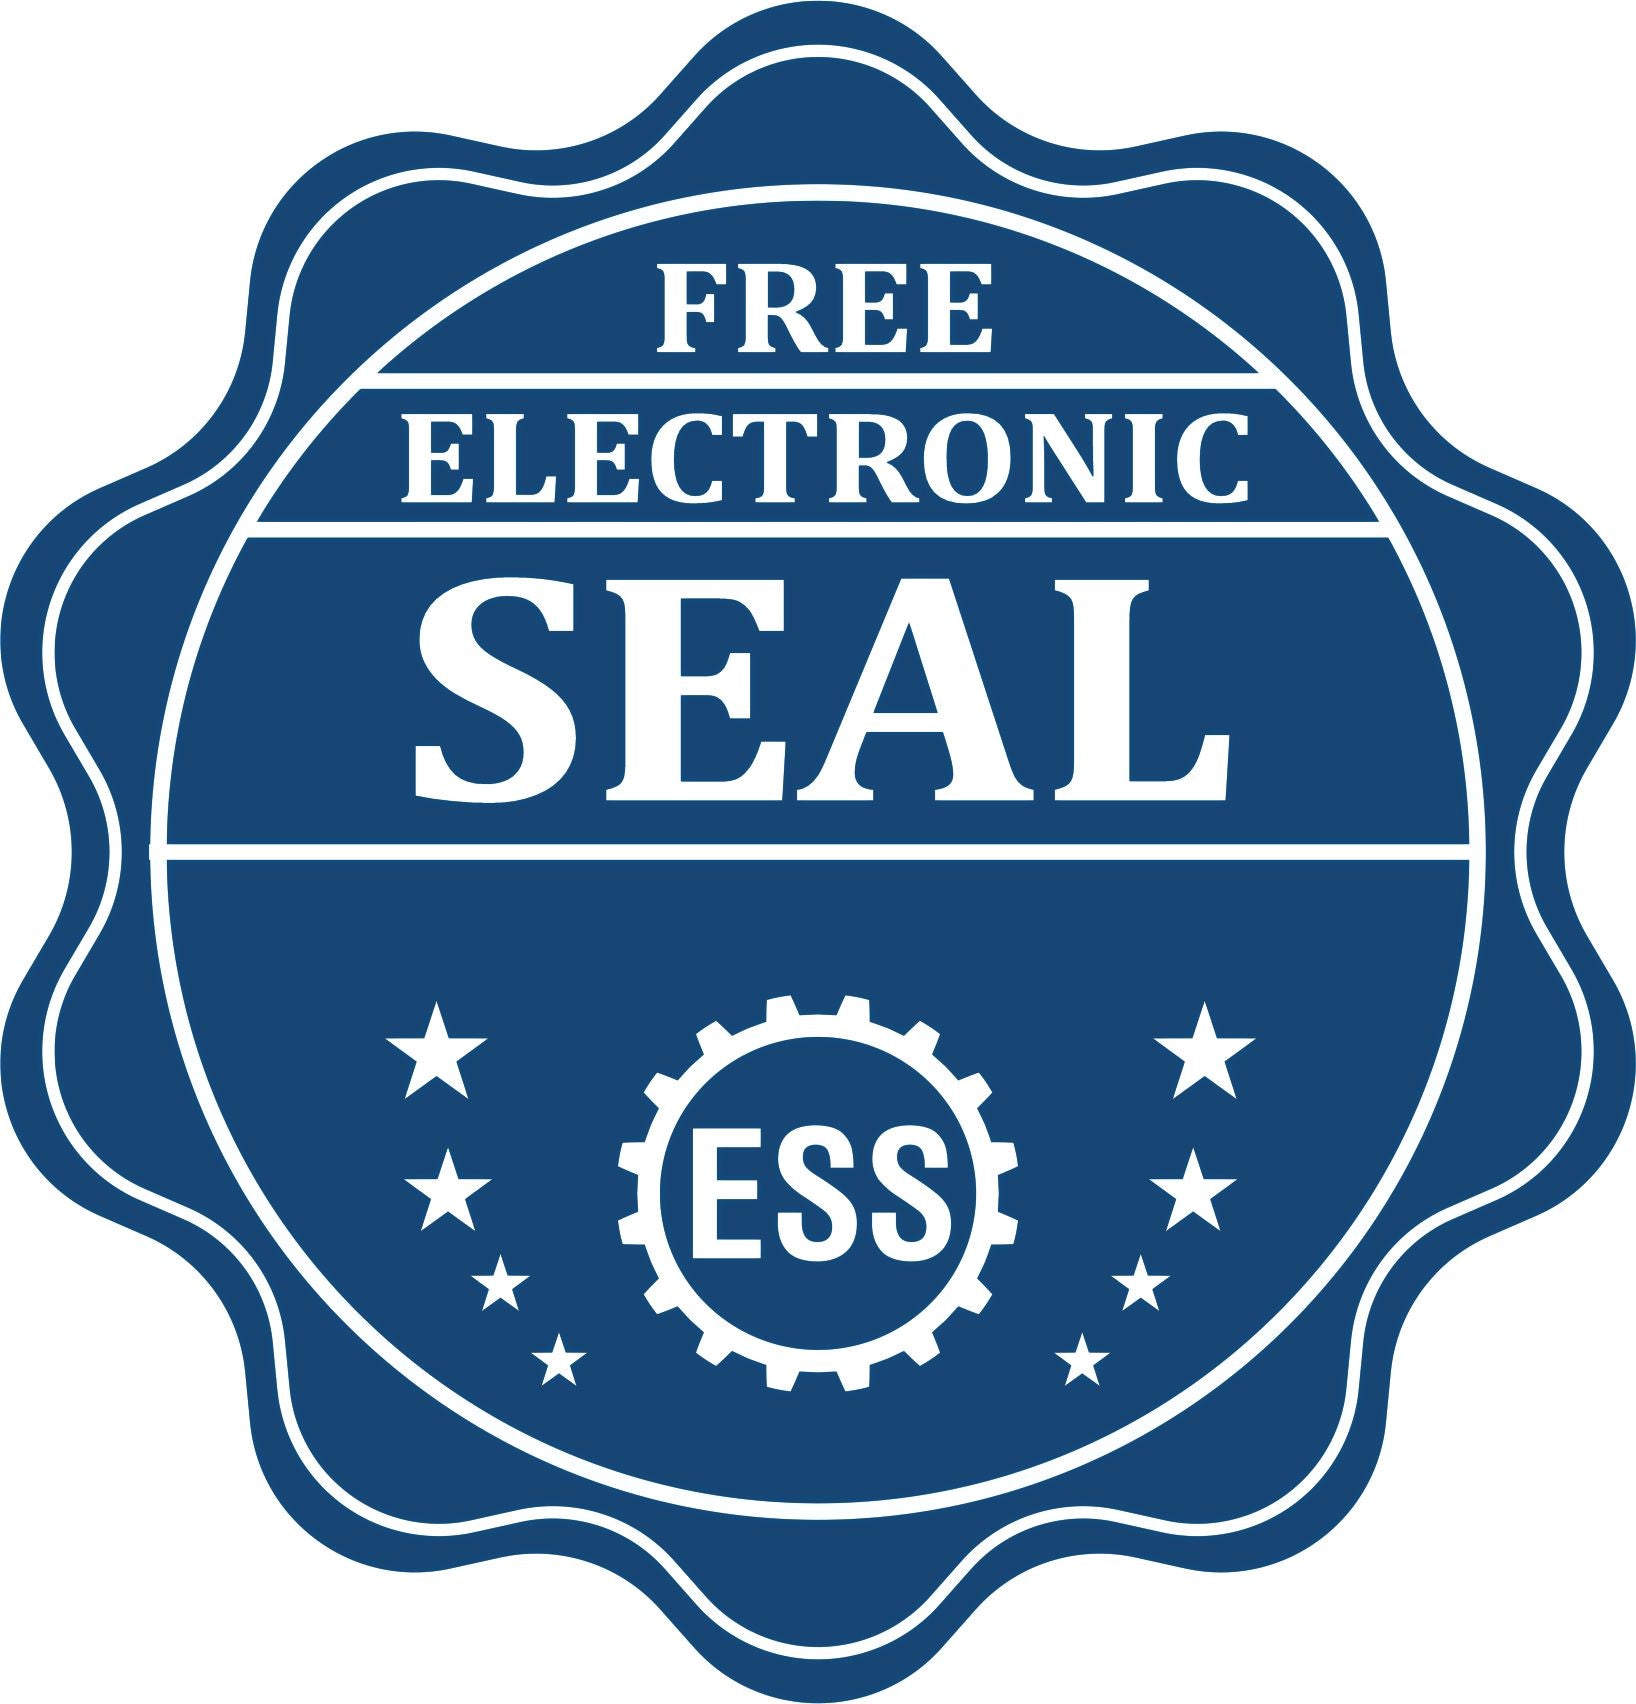 A badge showing a free electronic seal for the MaxLight Premium Pre-Inked North Dakota Rectangular Notarial Stamp with stars and the ESS gear on the emblem.